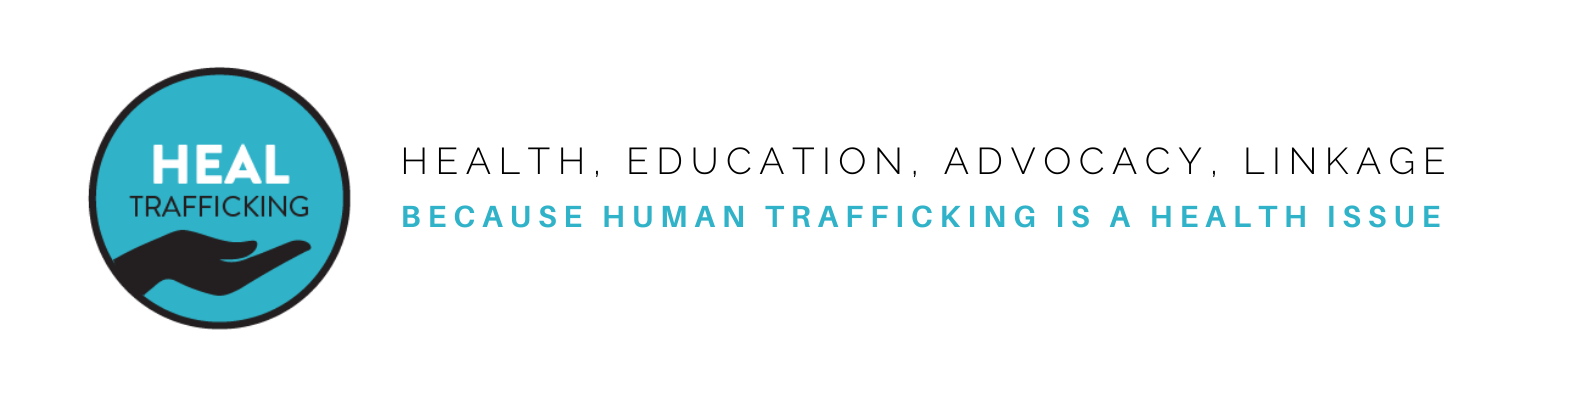 HEAL Trafficking: Health, Education, Advocacy, Linkage - Because human trafficking is a health issue.